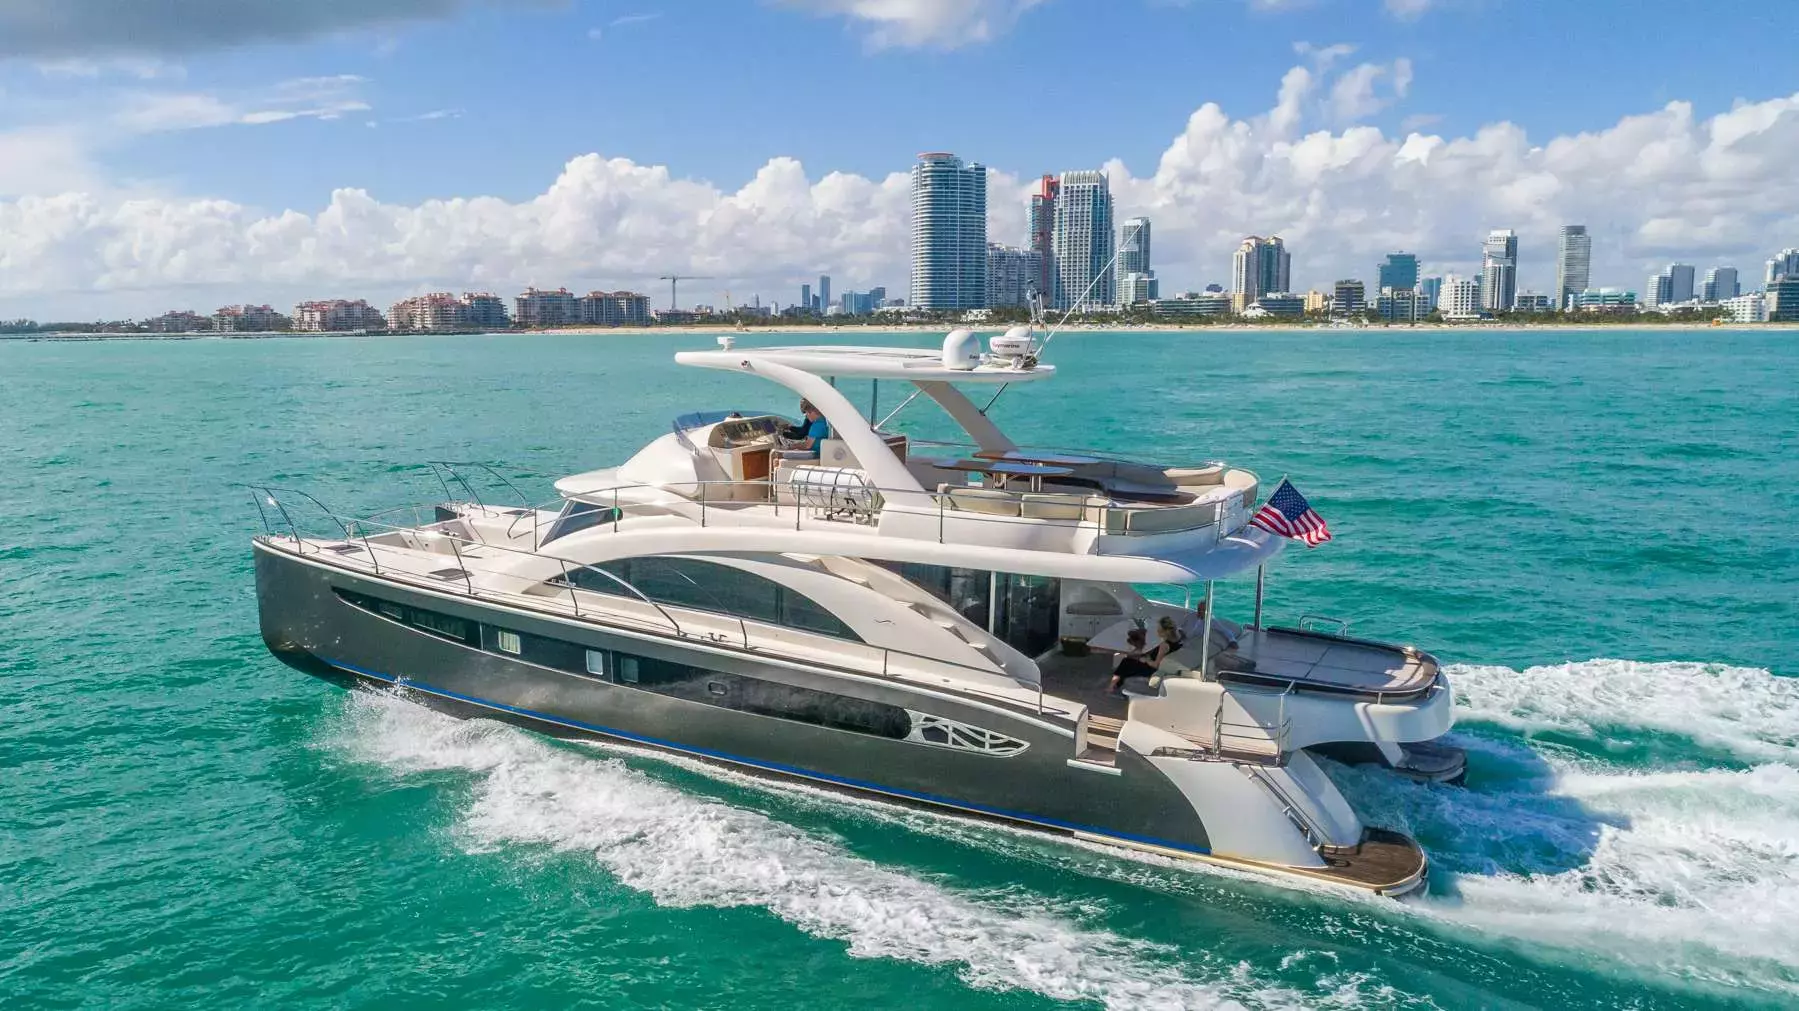 Legend & Soul by Rodriguez Yachts - Top rates for a Charter of a private Power Catamaran in Bahamas